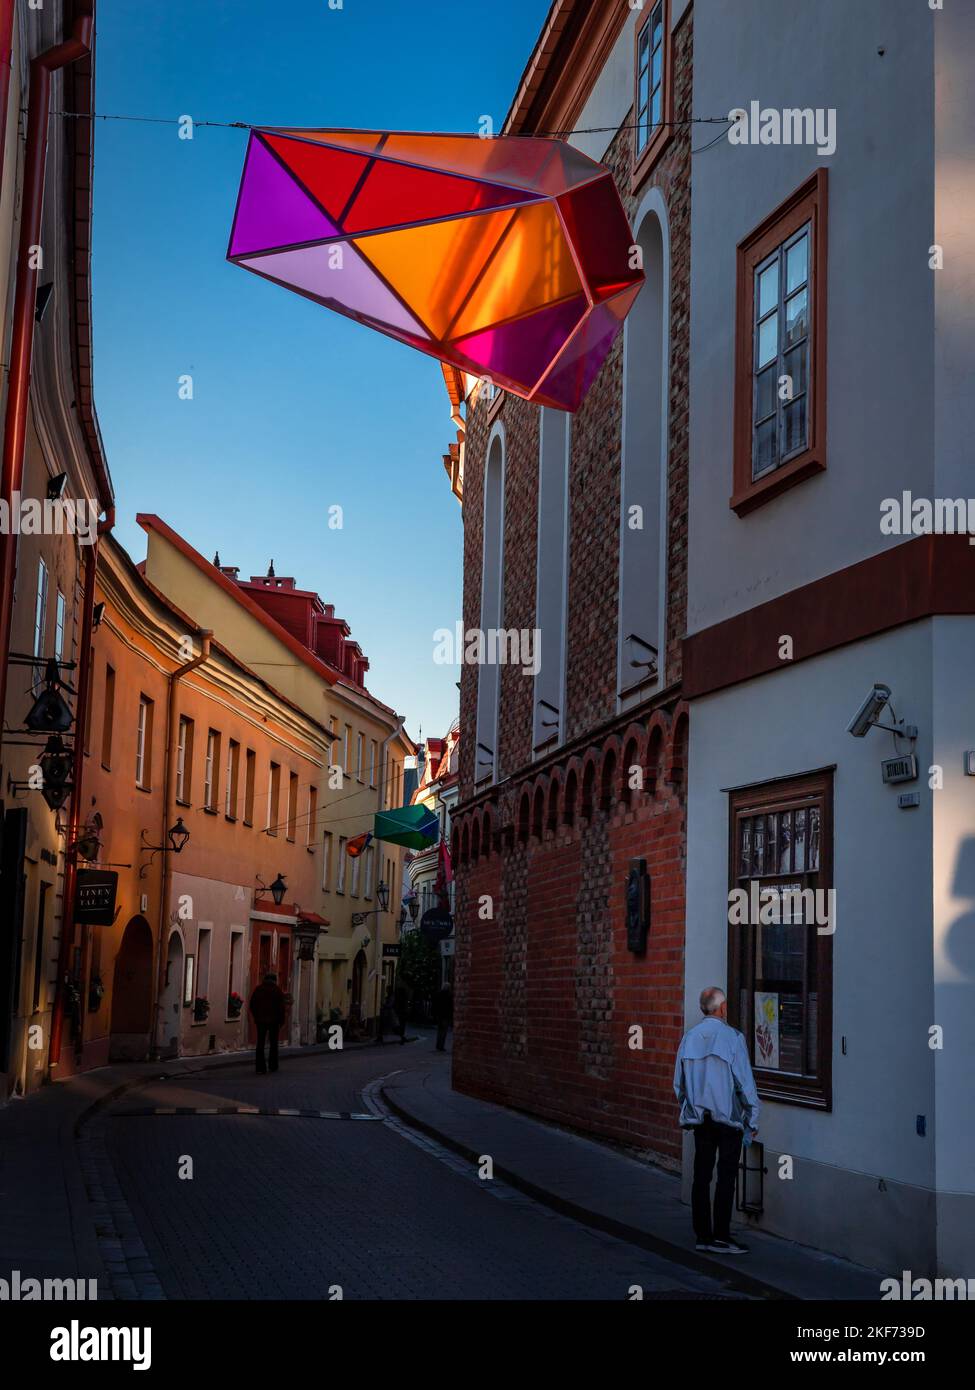 Vilnius, Lithuania - September 26, 2022: A historical street, which was a part of Jewish ghetto in World War II. A colorful decorative polyhedron lantern. Stock Photo